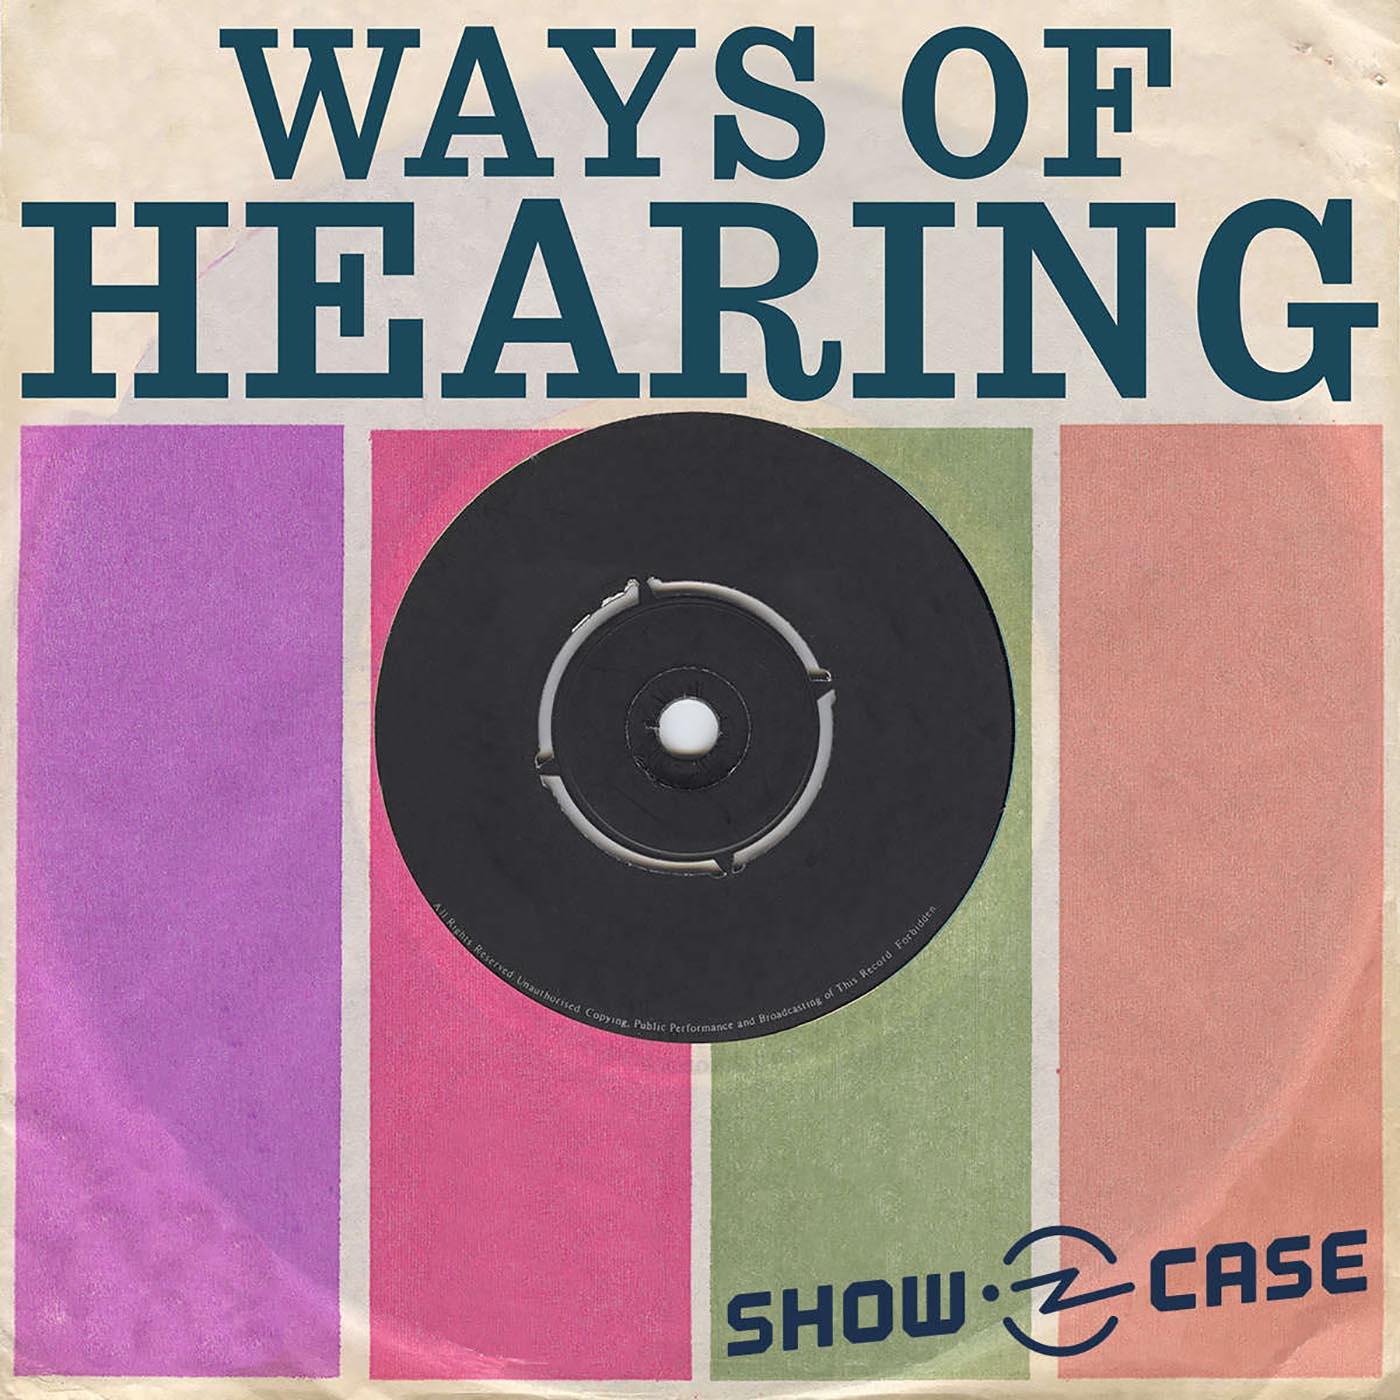 Thumbnail for "Ways of Hearing #6 – NOISE".